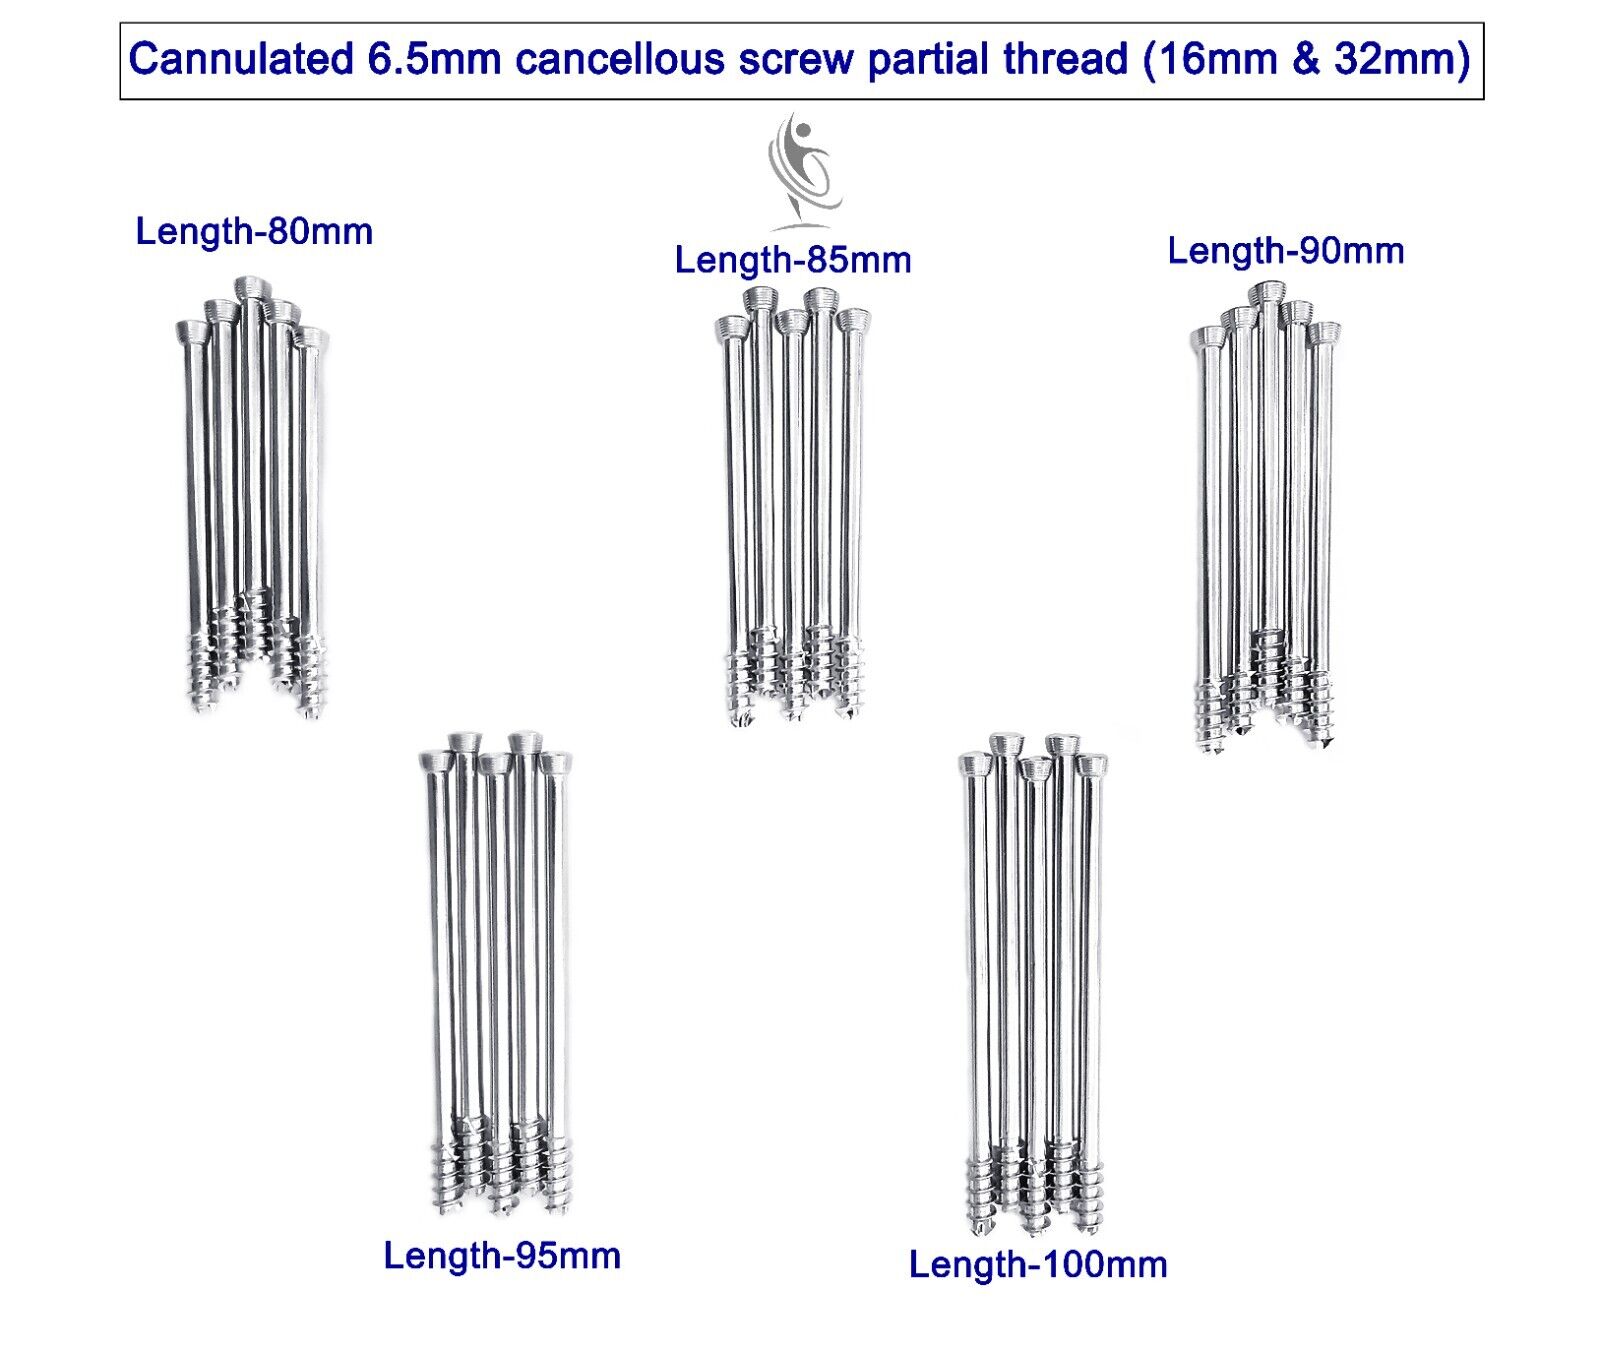 Cannulated 6.5mm cancellous screw partial thread (16mm & 32mm) veterinary